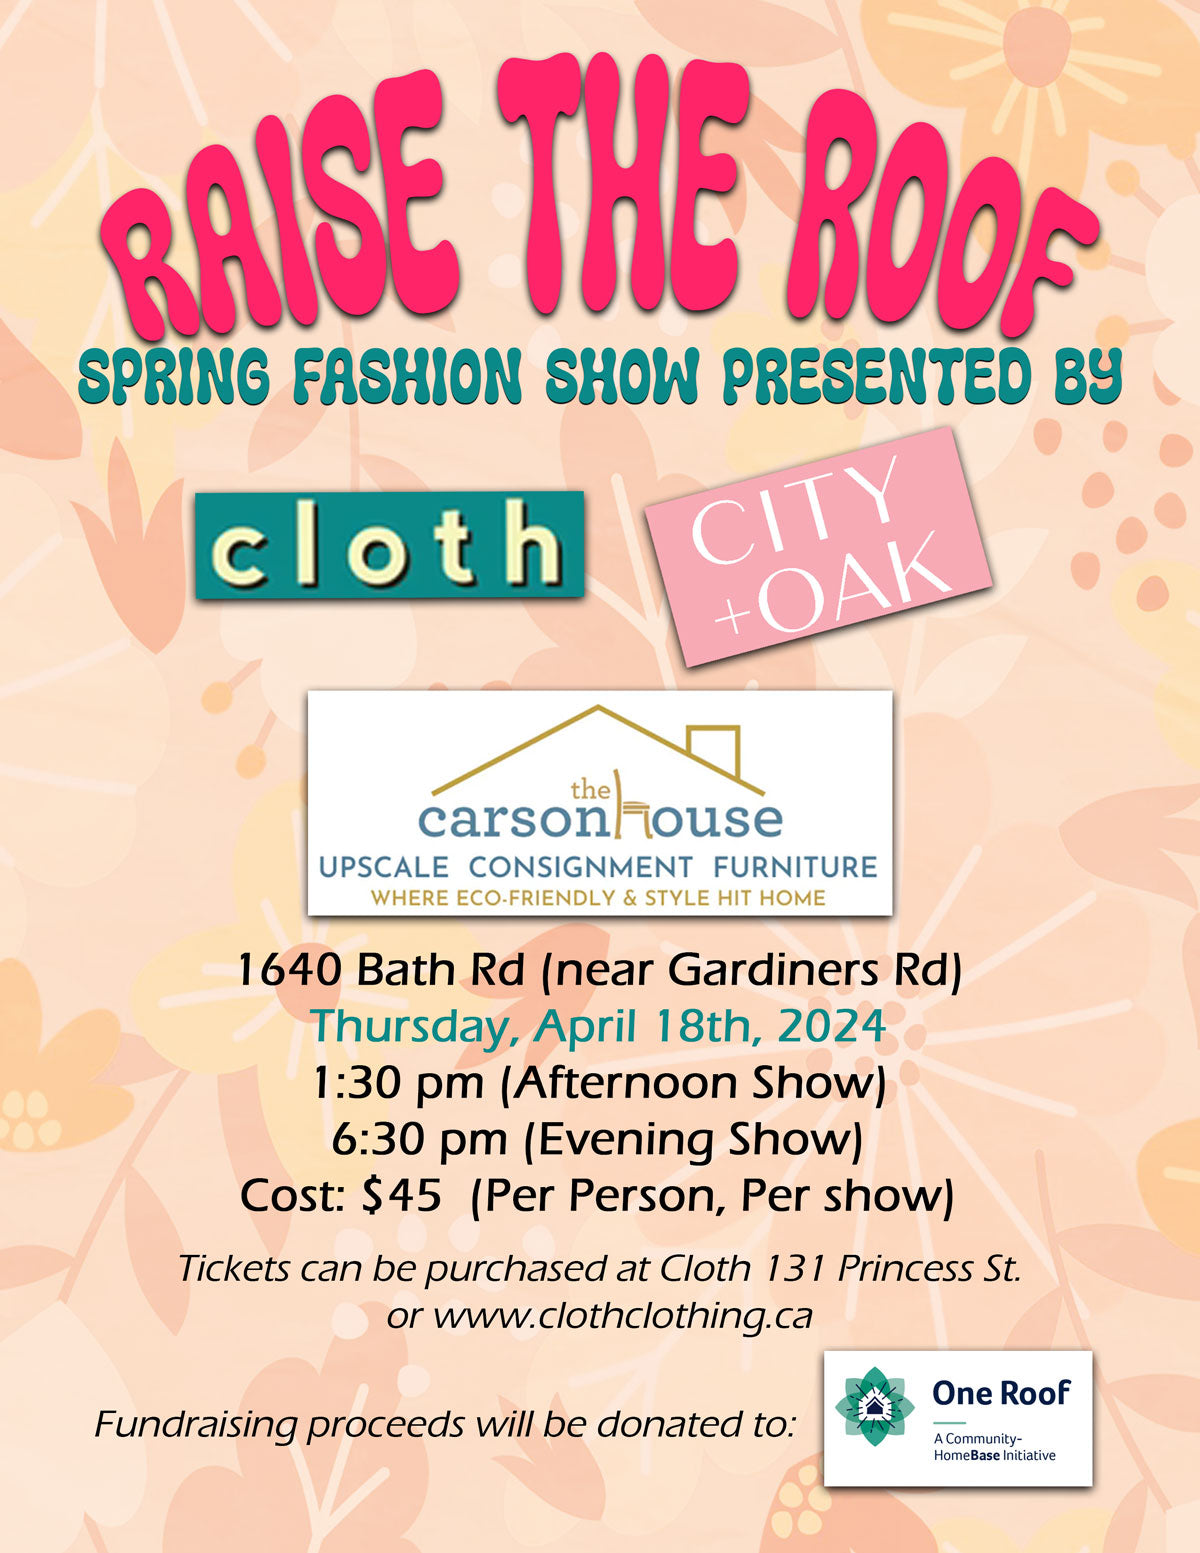 "RAISE THE ROOF" BY CITY+OAK & CLOTH - FASHION SHOW TICKETS